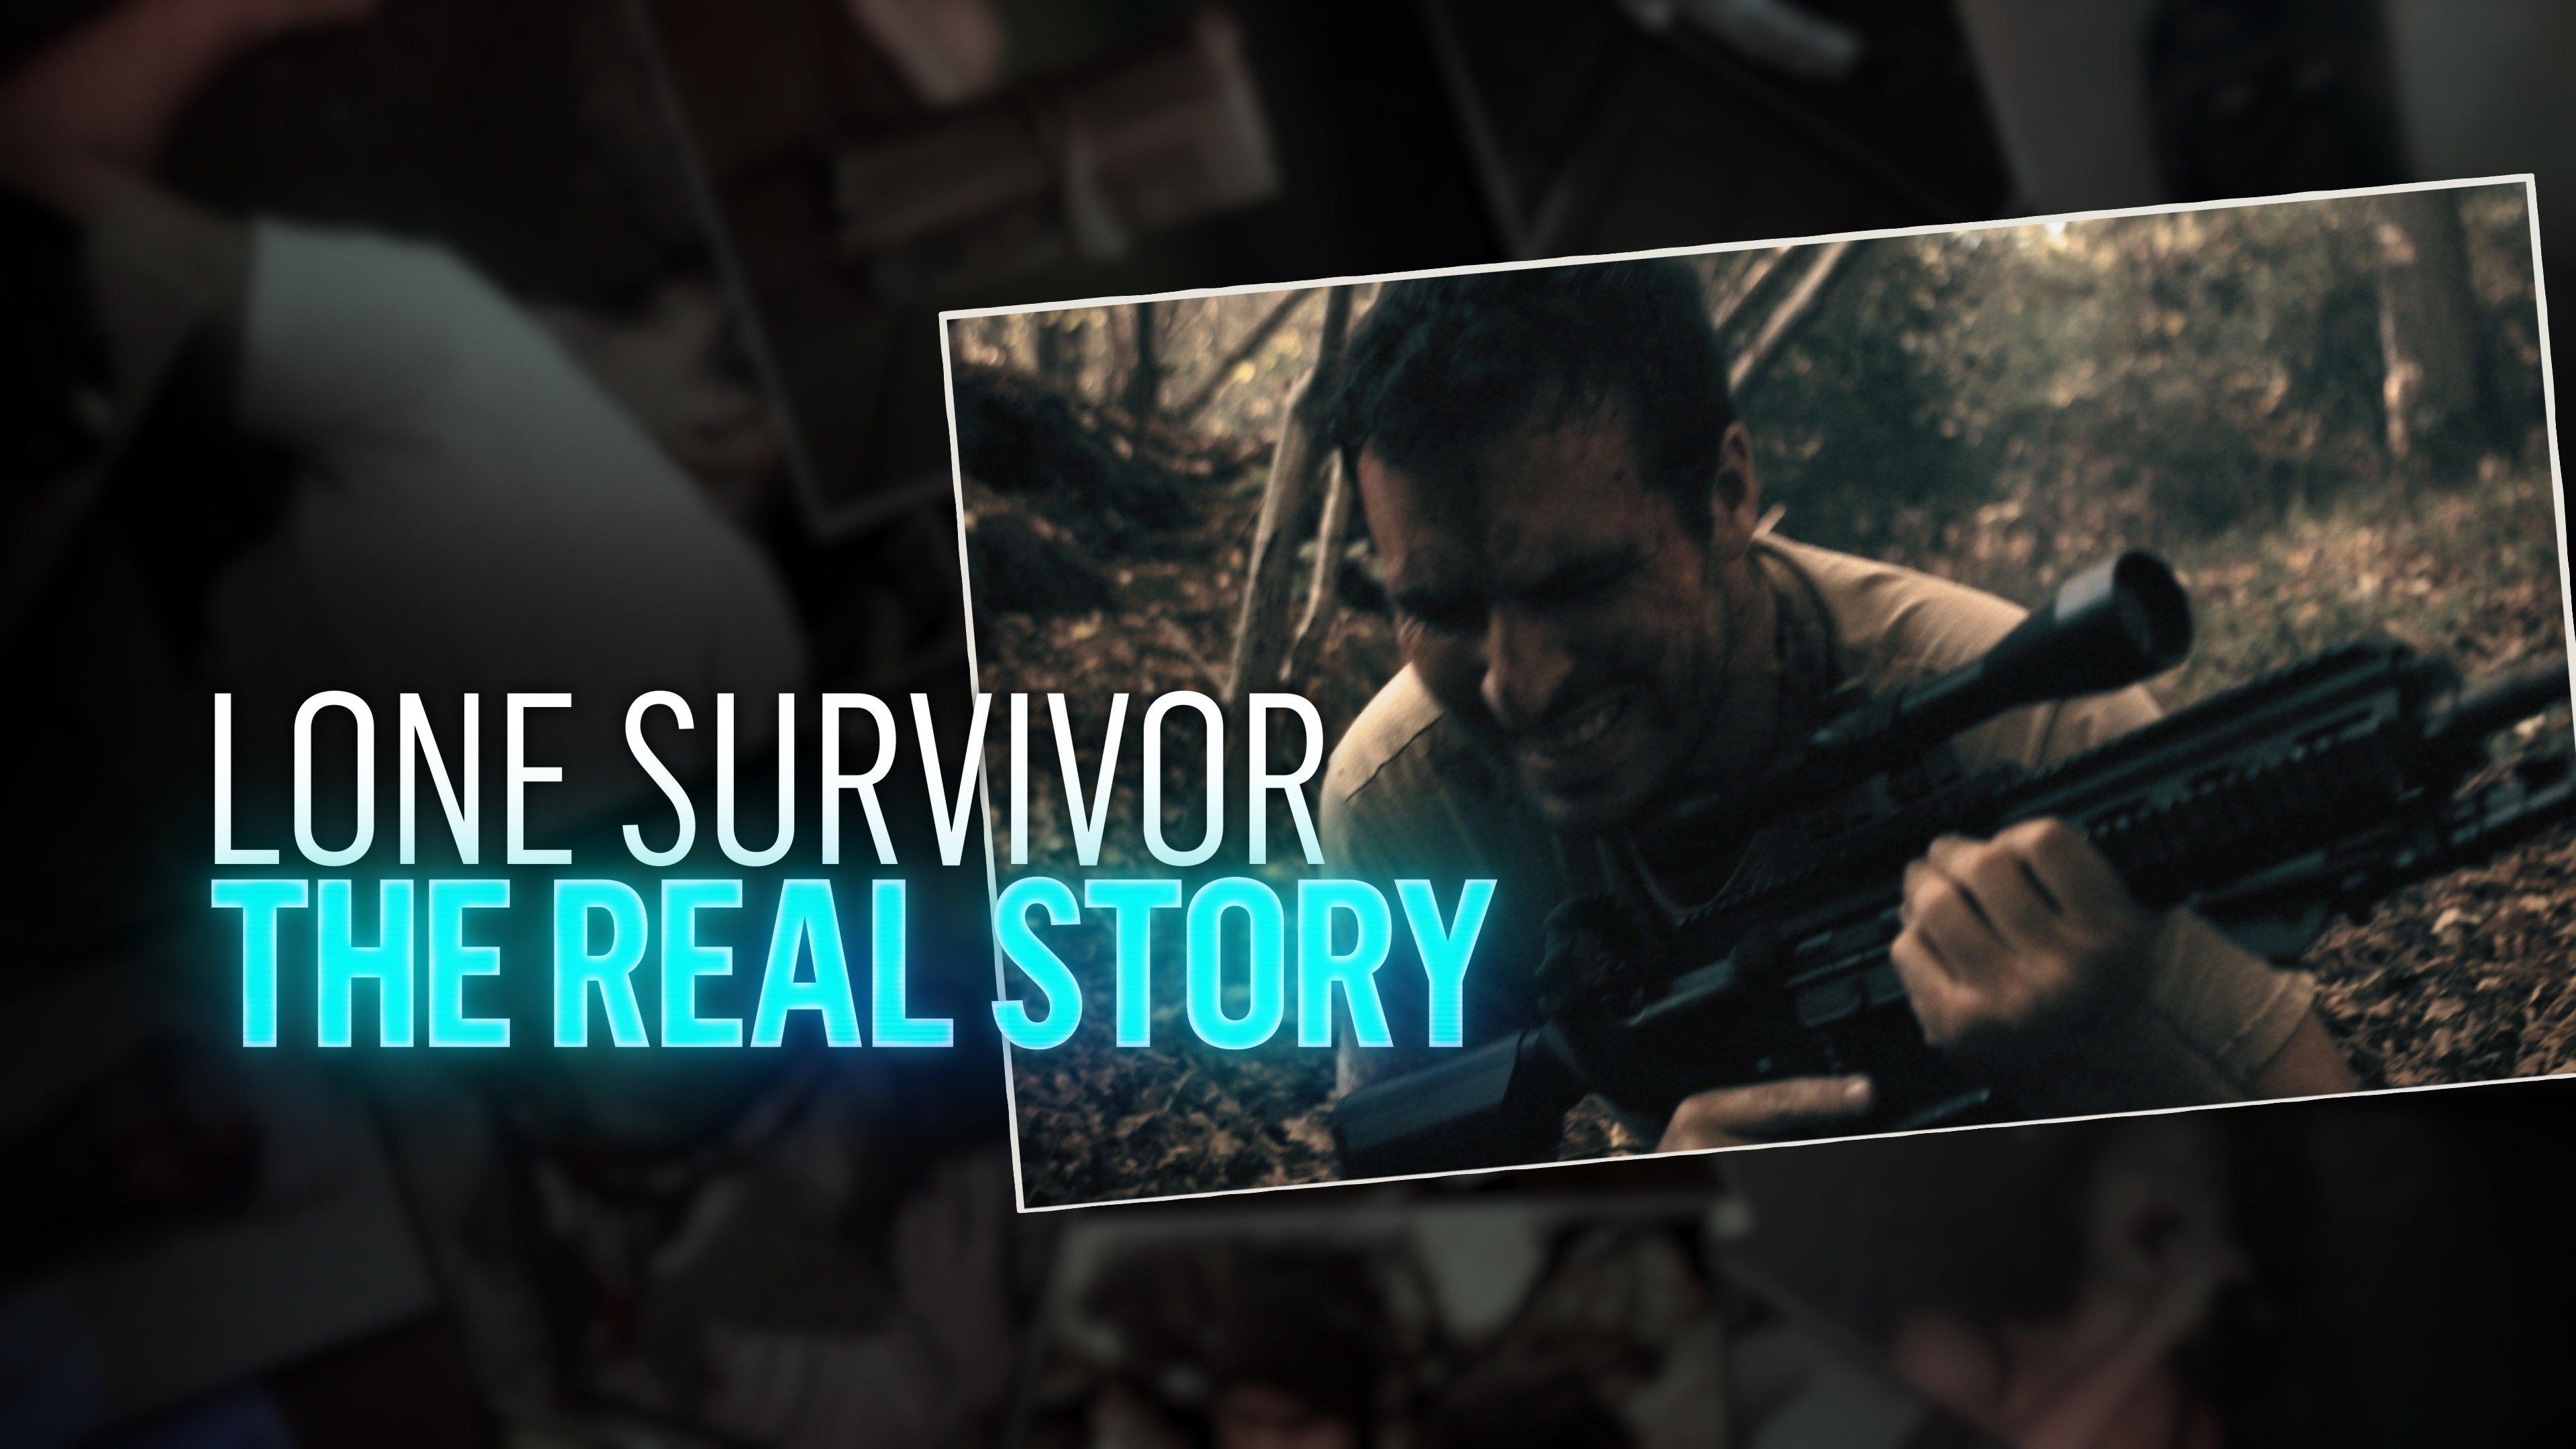 Watch Lone Survivor The Real Story Streaming Online on Philo (Free Trial)